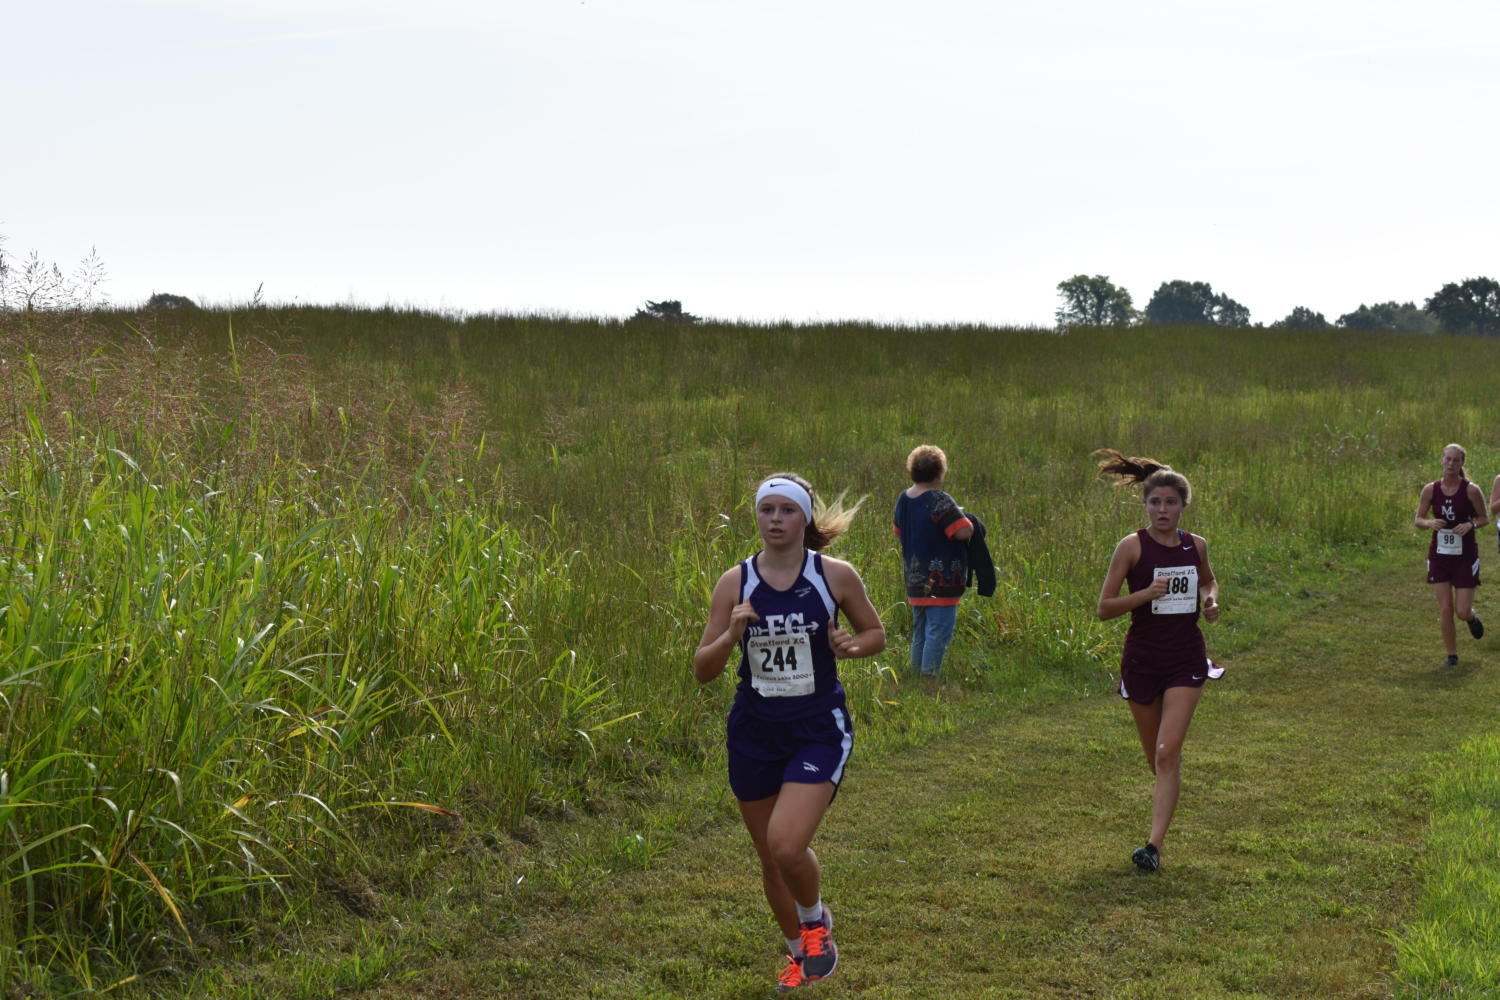 Macey Stallings competes at Fellows Lake in the first meet